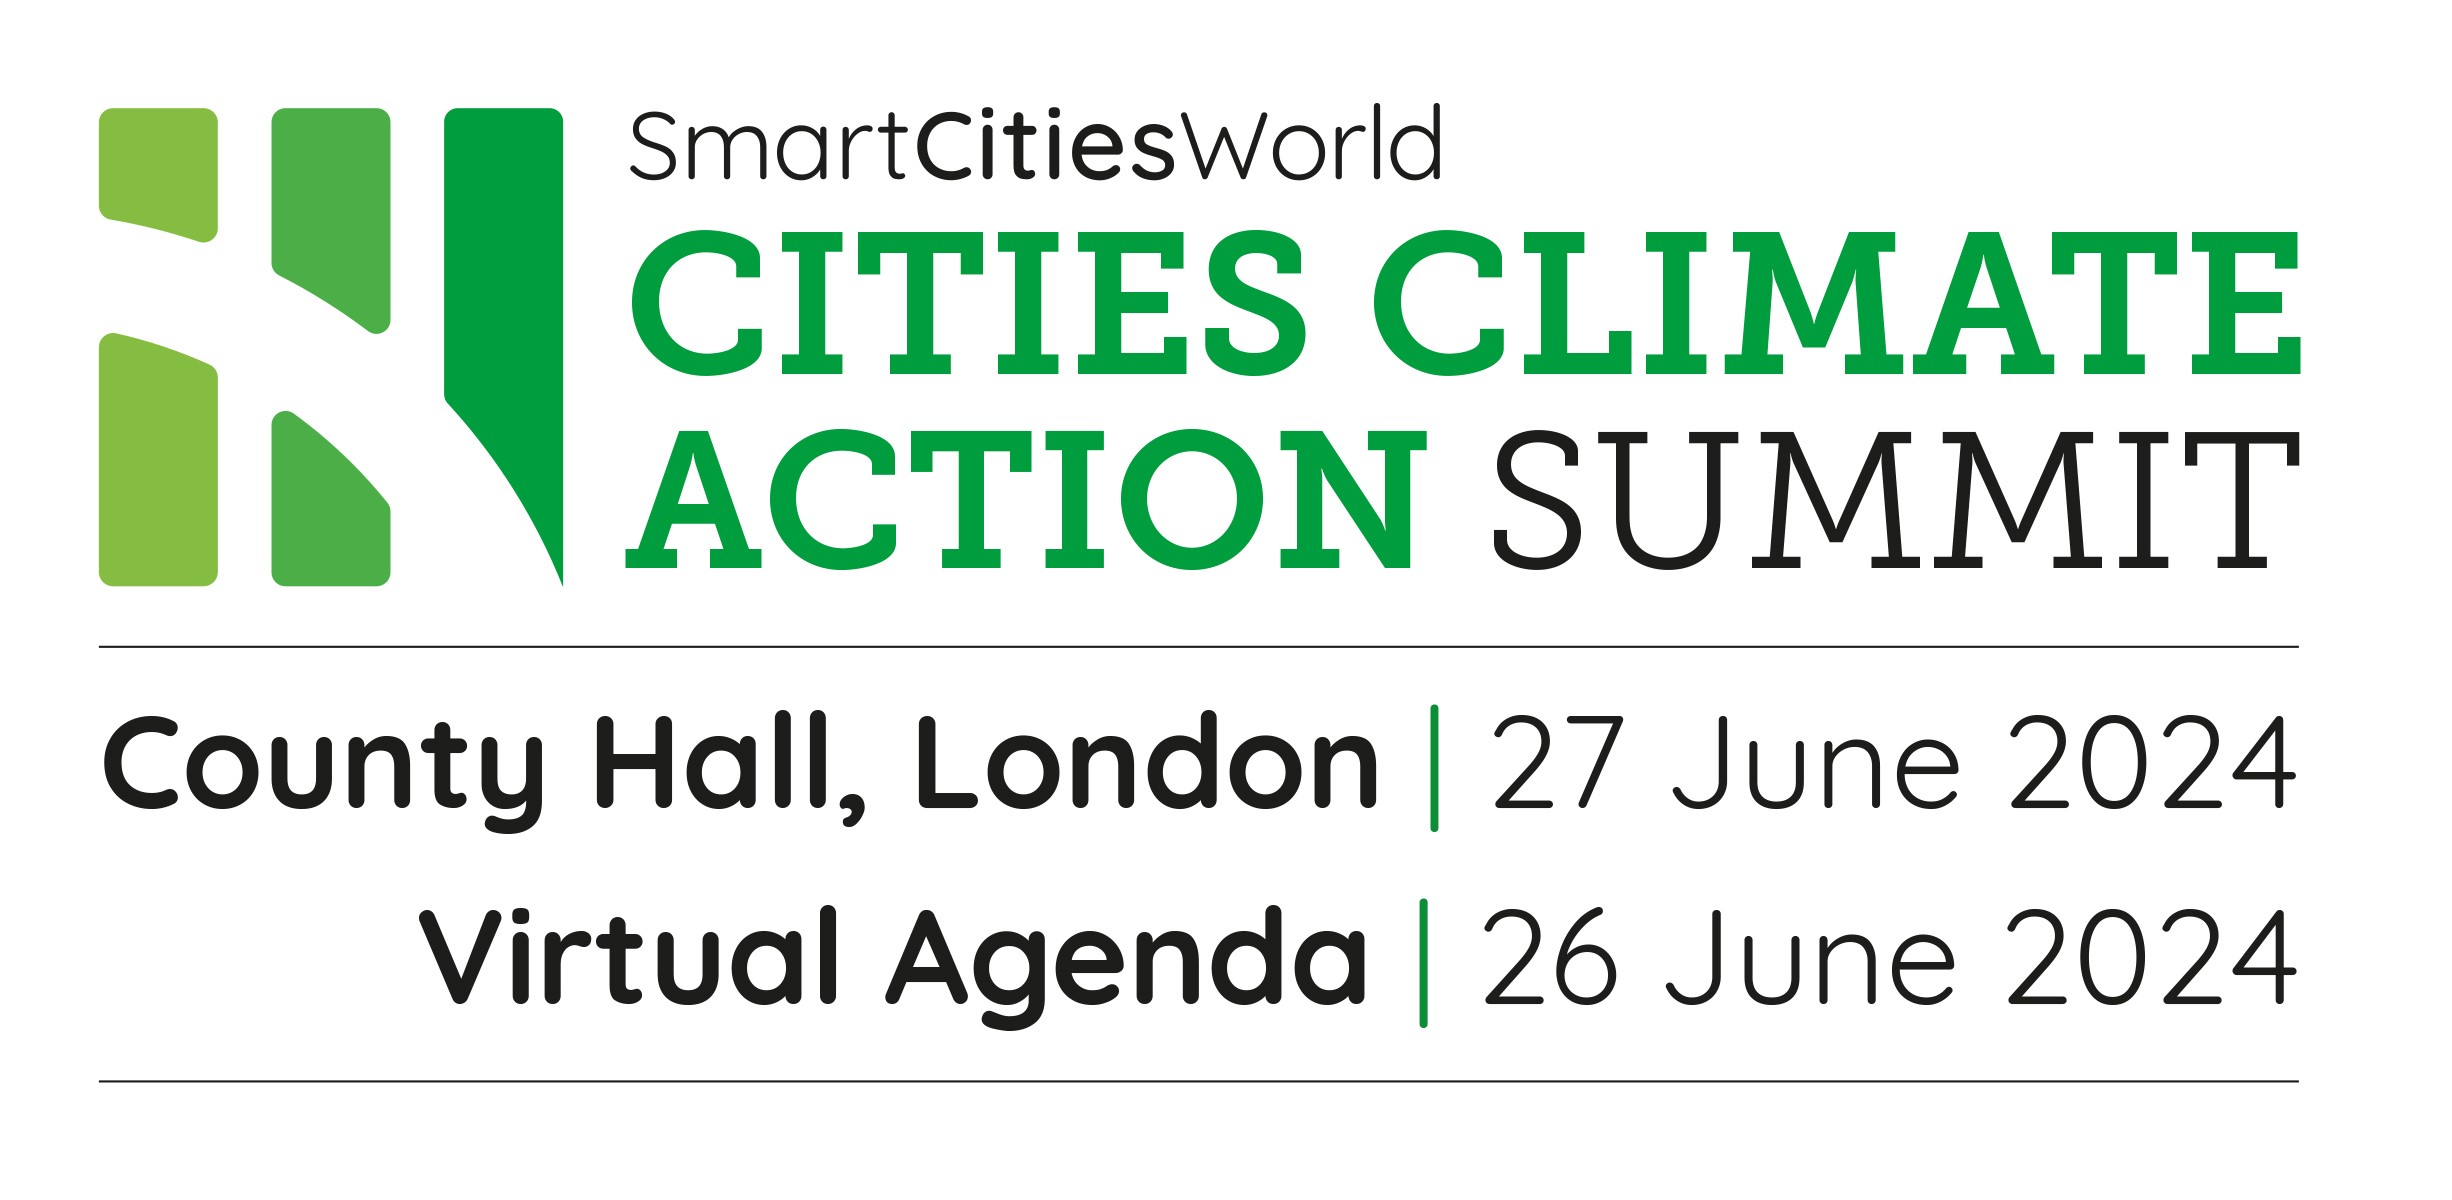 SmartCitiesWorld - Cities Climate Action Summit, 26 - 27 June 2024 - London